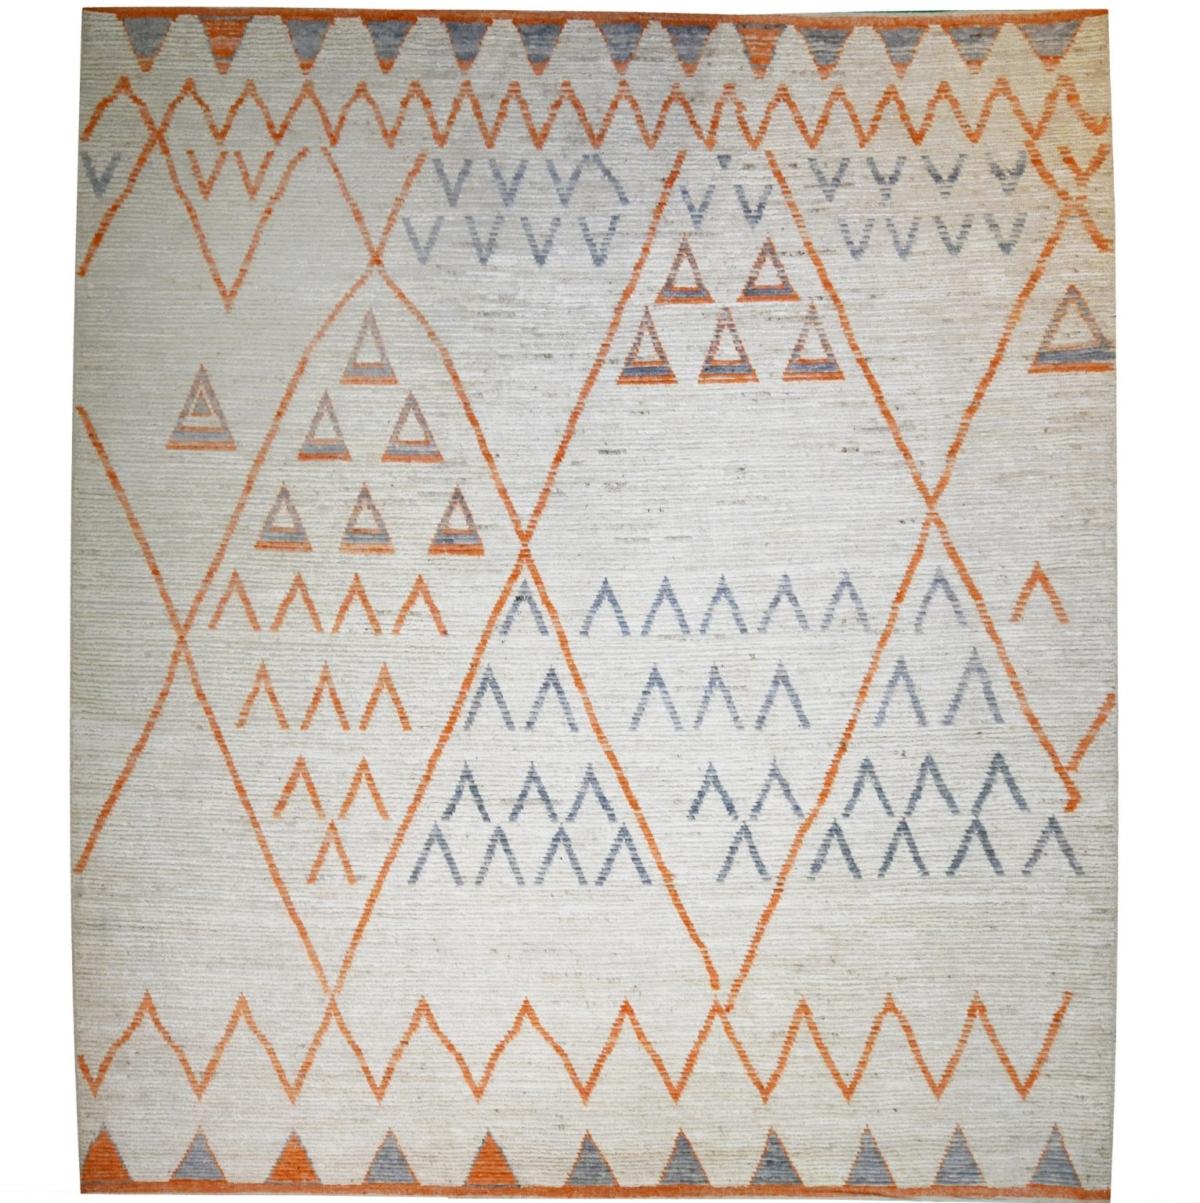 Geometric Moroccan Rug 10′ x 8’3″ In Good Condition For Sale In Sag Harbor, NY